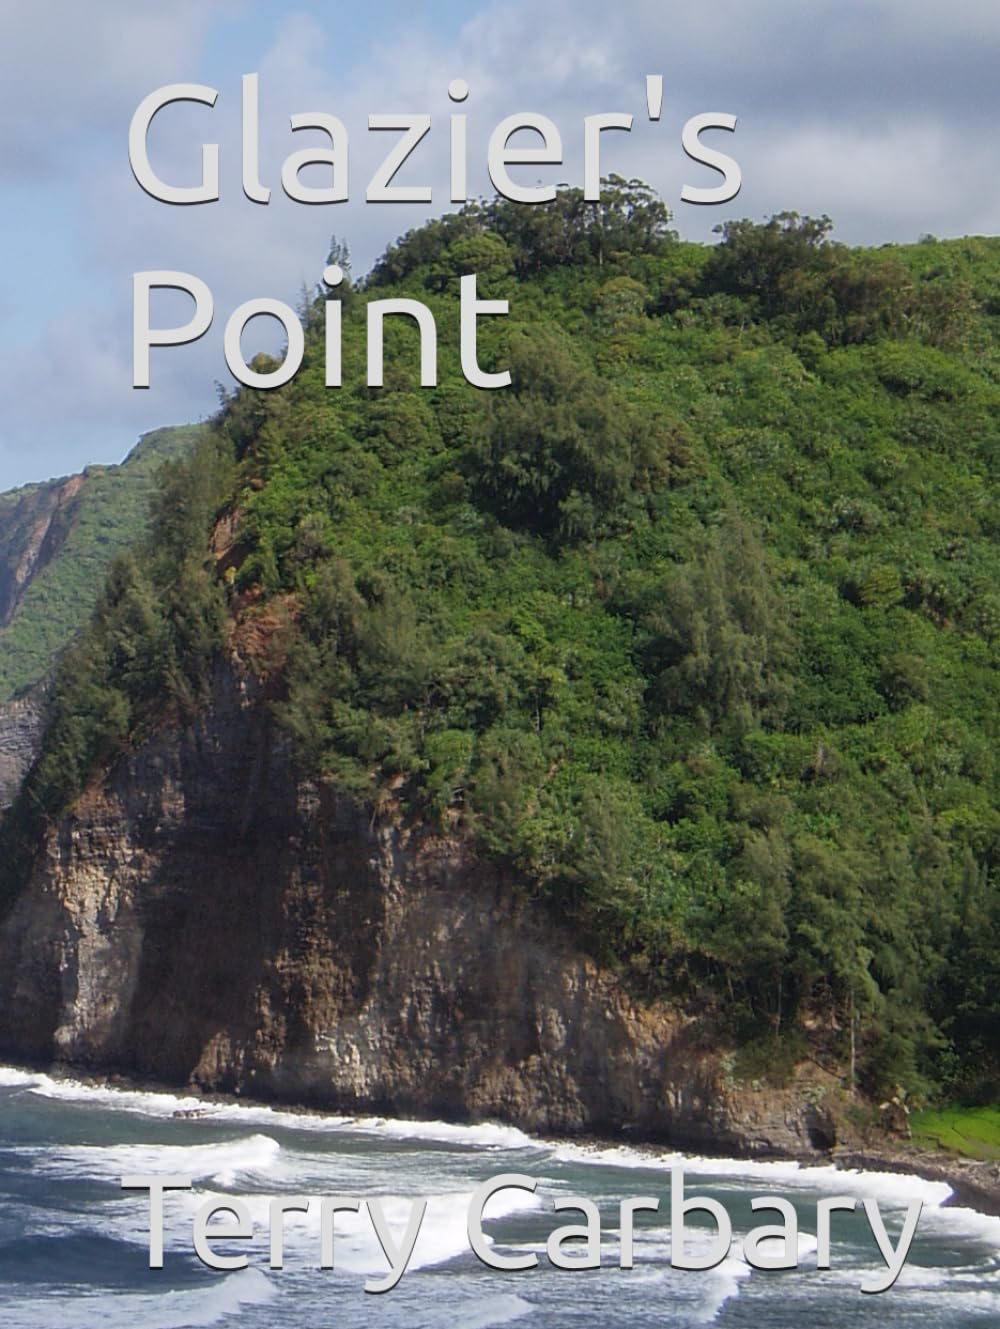 Book cover for Glazier's Point, available to option through OptionAvenue